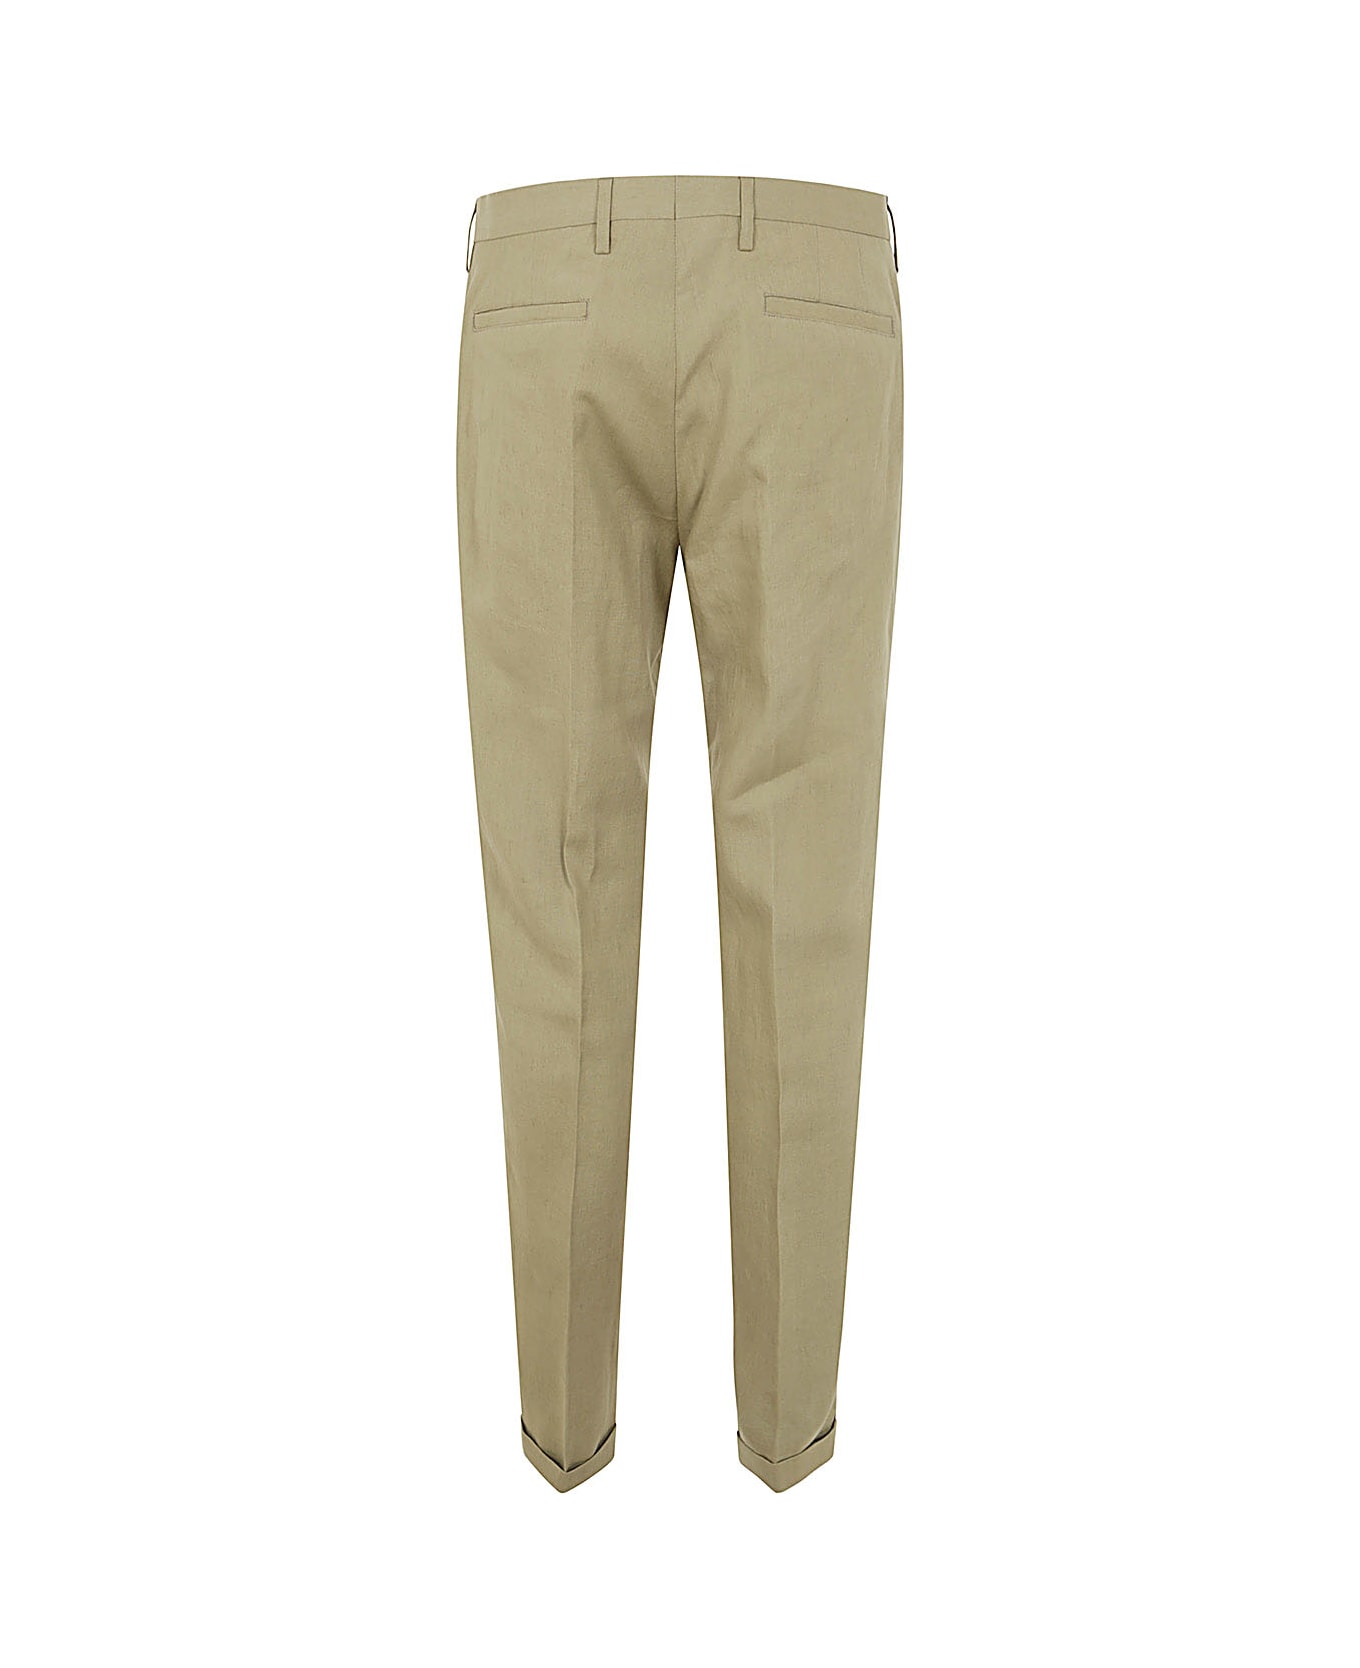 Paul Smith Mens Trouser - Browns